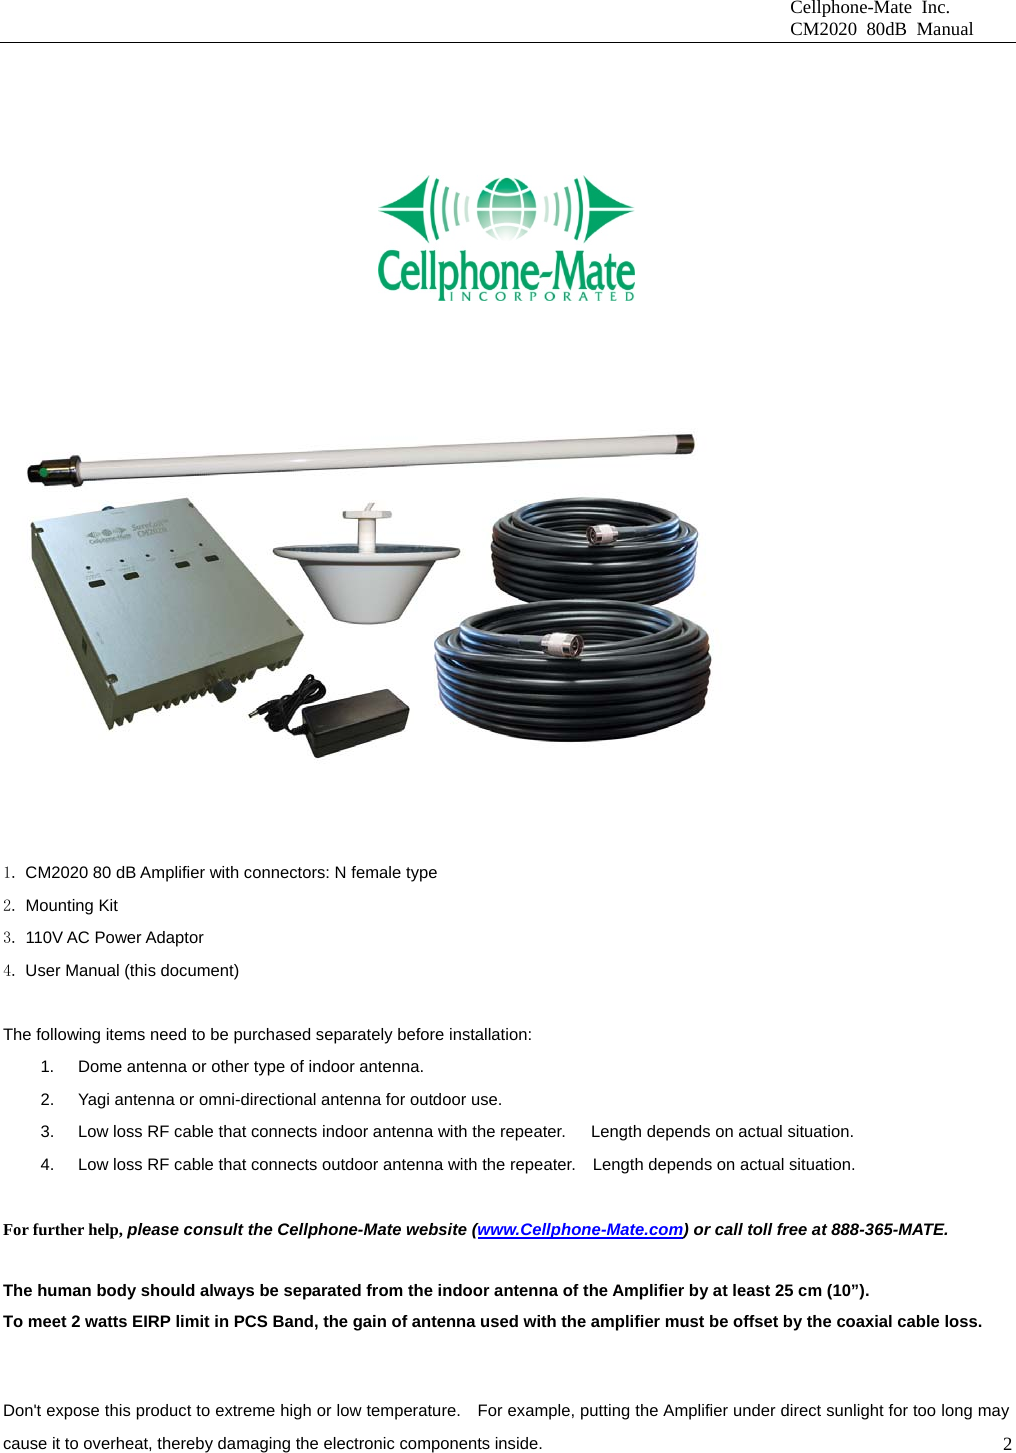                              Cellphone-Mate Inc.                              CM2020 80dB Manual  2      CONTENTS OF THE PACKAGE     1. CM2020 80 dB Amplifier with connectors: N female type 2. Mounting Kit 3. 110V AC Power Adaptor   4. User Manual (this document)  The following items need to be purchased separately before installation:   1.  Dome antenna or other type of indoor antenna.   2.  Yagi antenna or omni-directional antenna for outdoor use.   3.  Low loss RF cable that connects indoor antenna with the repeater.      Length depends on actual situation.     4.  Low loss RF cable that connects outdoor antenna with the repeater.    Length depends on actual situation.    For further help, please consult the Cellphone-Mate website (www.Cellphone-Mate.com) or call toll free at 888-365-MATE.AFETY NOTES      The human body should always be separated from the indoor antenna of the Amplifier by at least 25 cm (10”). To meet 2 watts EIRP limit in PCS Band, the gain of antenna used with the amplifier must be offset by the coaxial cable loss. Don&apos;t expose this product to extreme high or low temperature.    For example, putting the Amplifier under direct sunlight for too long may cause it to overheat, thereby damaging the electronic components inside. 